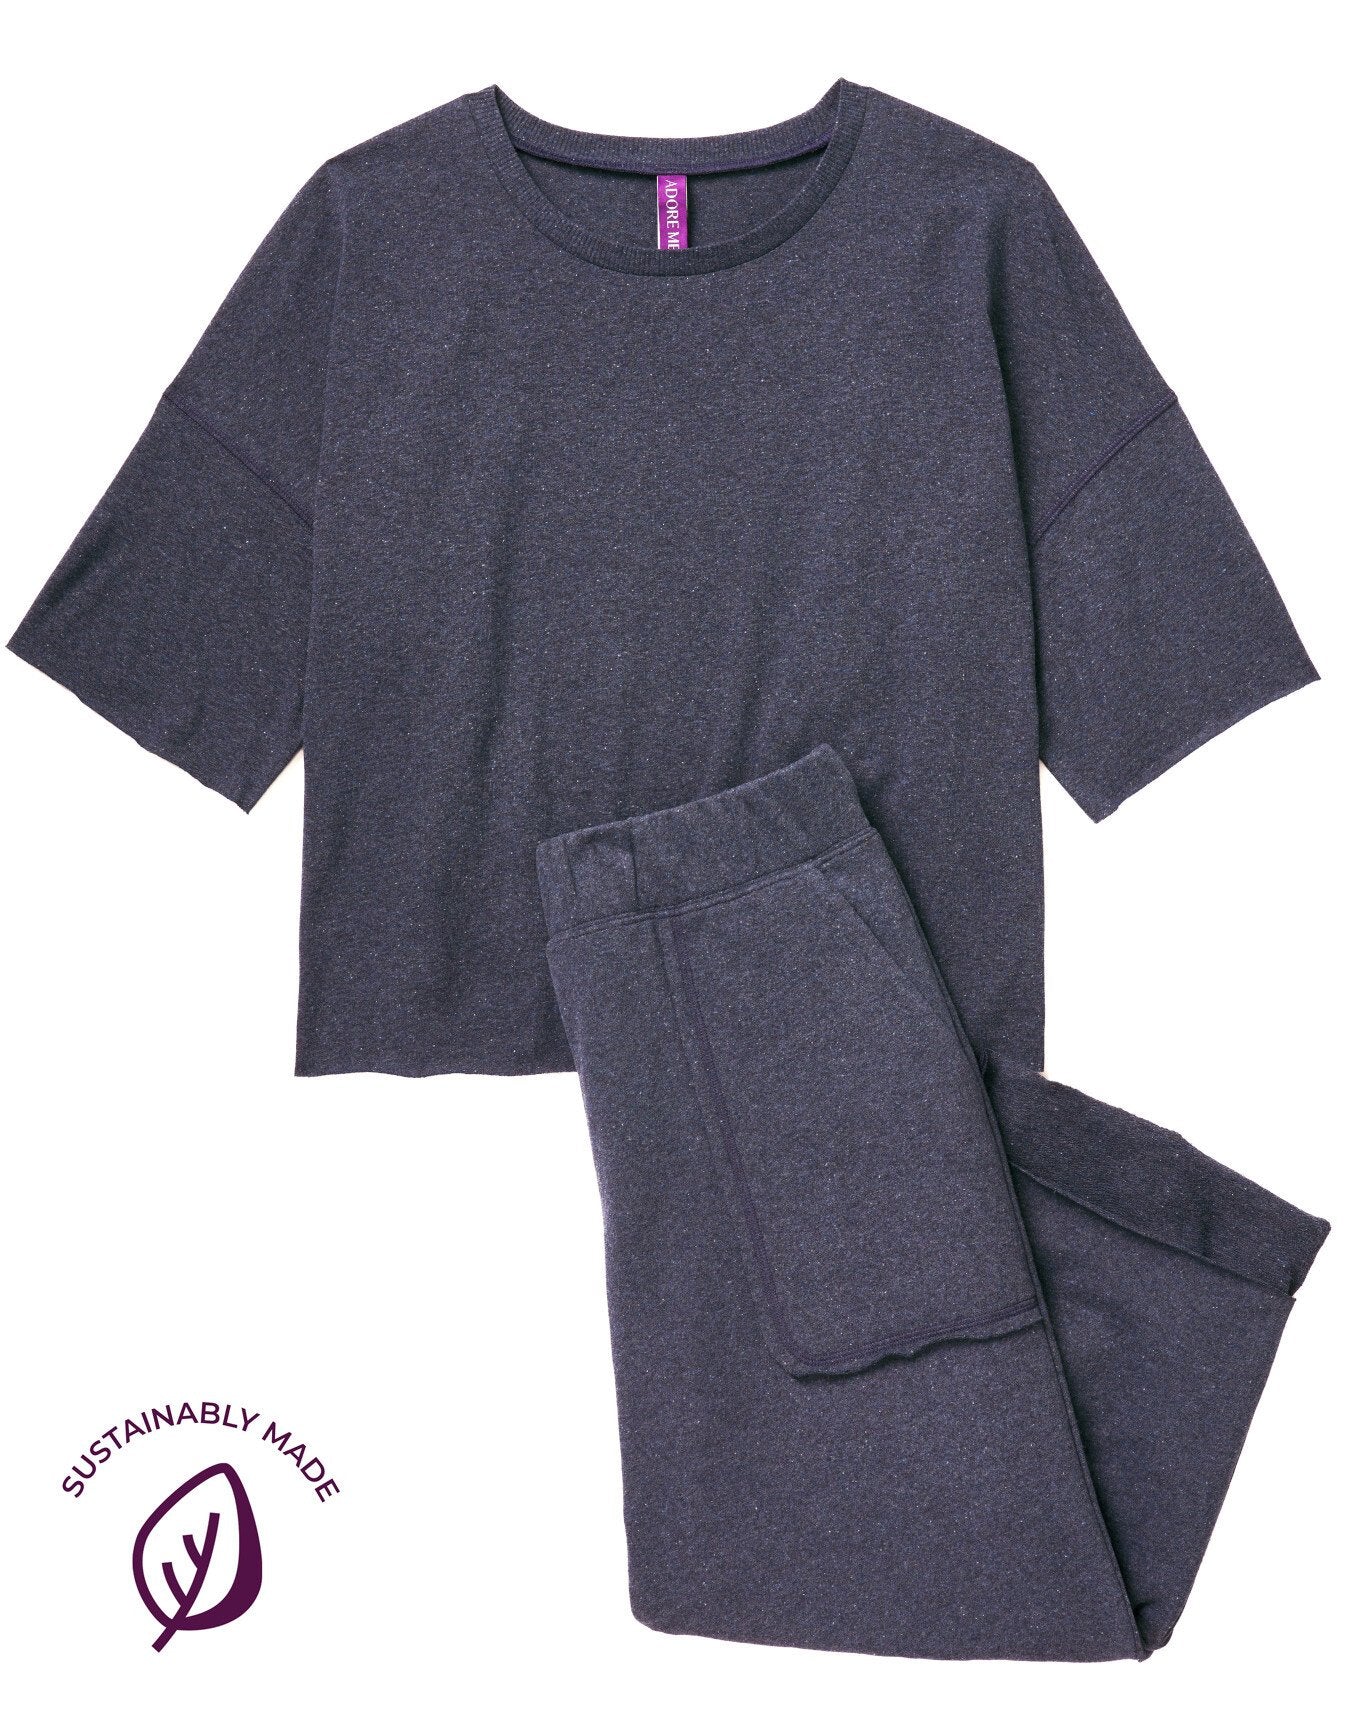 Adore Me Avery T-Shirt & Sweatpant Set in color Evening Blue and shape pj